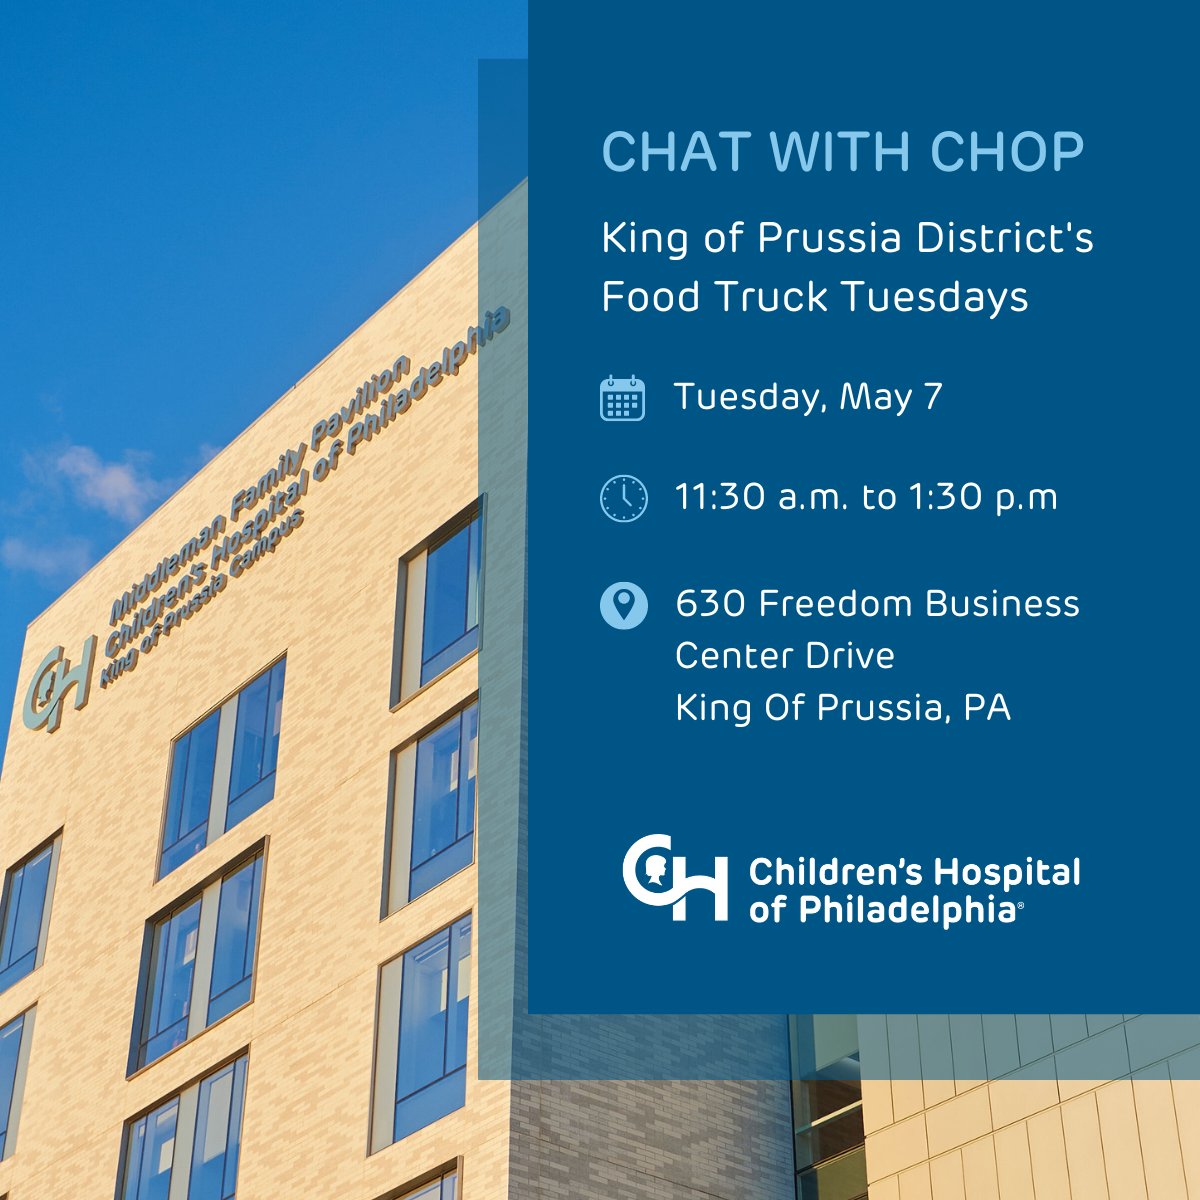 Join us for a midday break at King of Prussia District's Food Truck Tuesdays! Enjoy live music, tasty food truck treats, and chat with CHOP recruiters about job opportunities at Middleman Family Pavilion, CHOP's King of Prussia Hospital. See you there! 🎶🍔